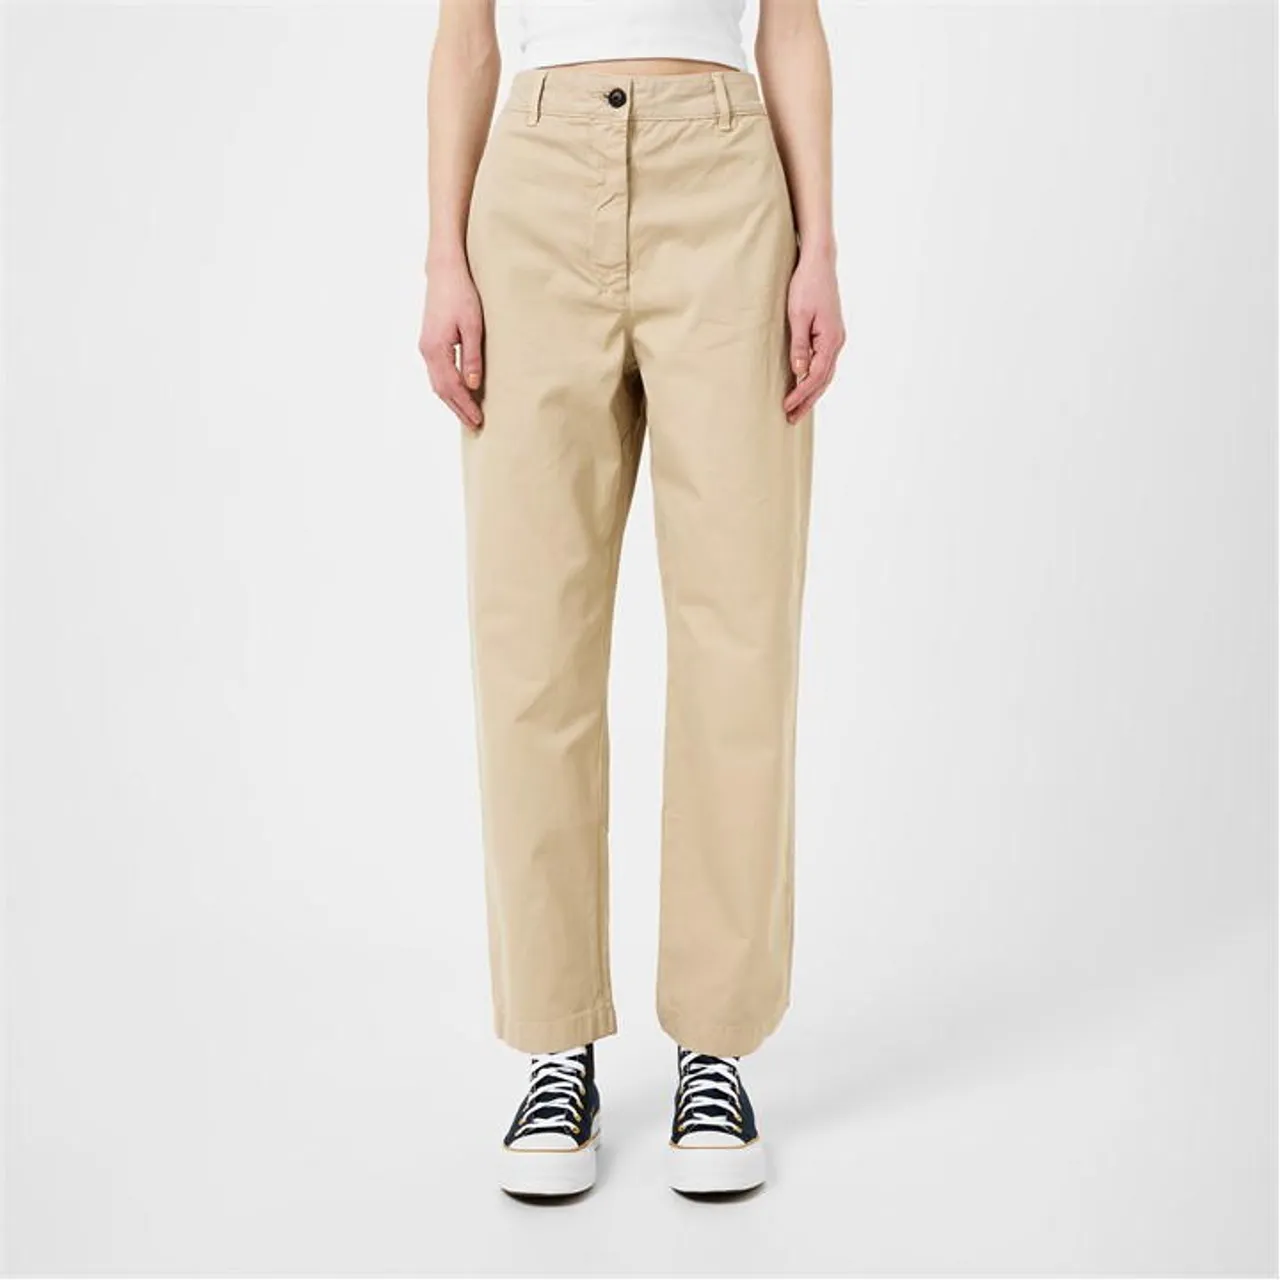 Tommy Hilfiger Md Tapered Chino Pant - Cream